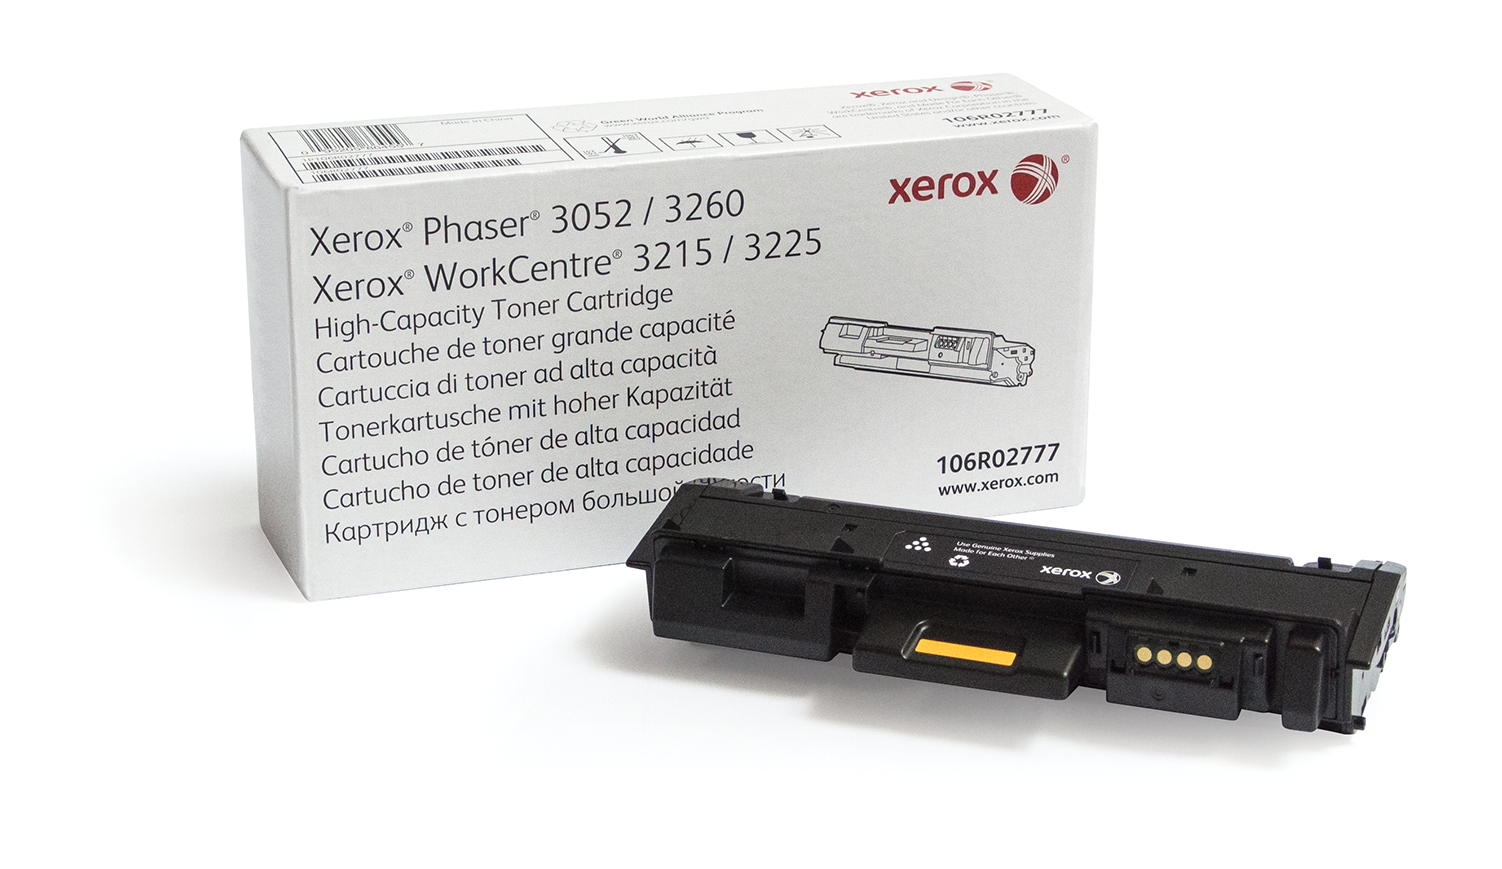 Black, High Capacity Toner Cartridge, Phaser 3260/WorkCentre 3215/3225  (3,000 Pages) 106R02777 Genuine Xerox Supplies